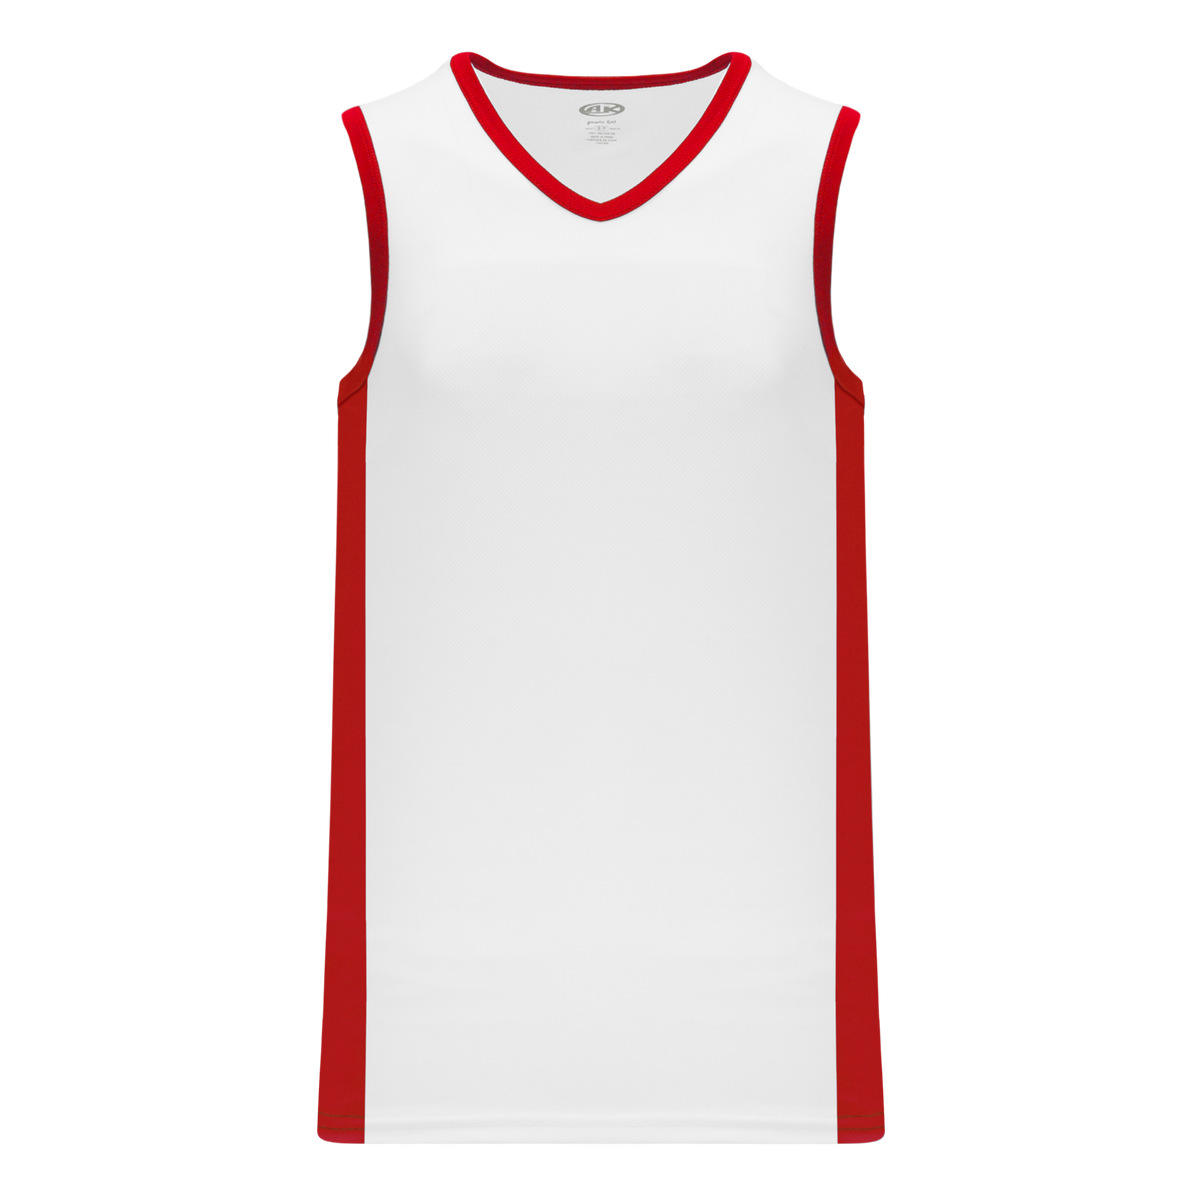 Athletic Knit (AK) B2115Y-209 Youth White/Red Pro Basketball Jersey Medium